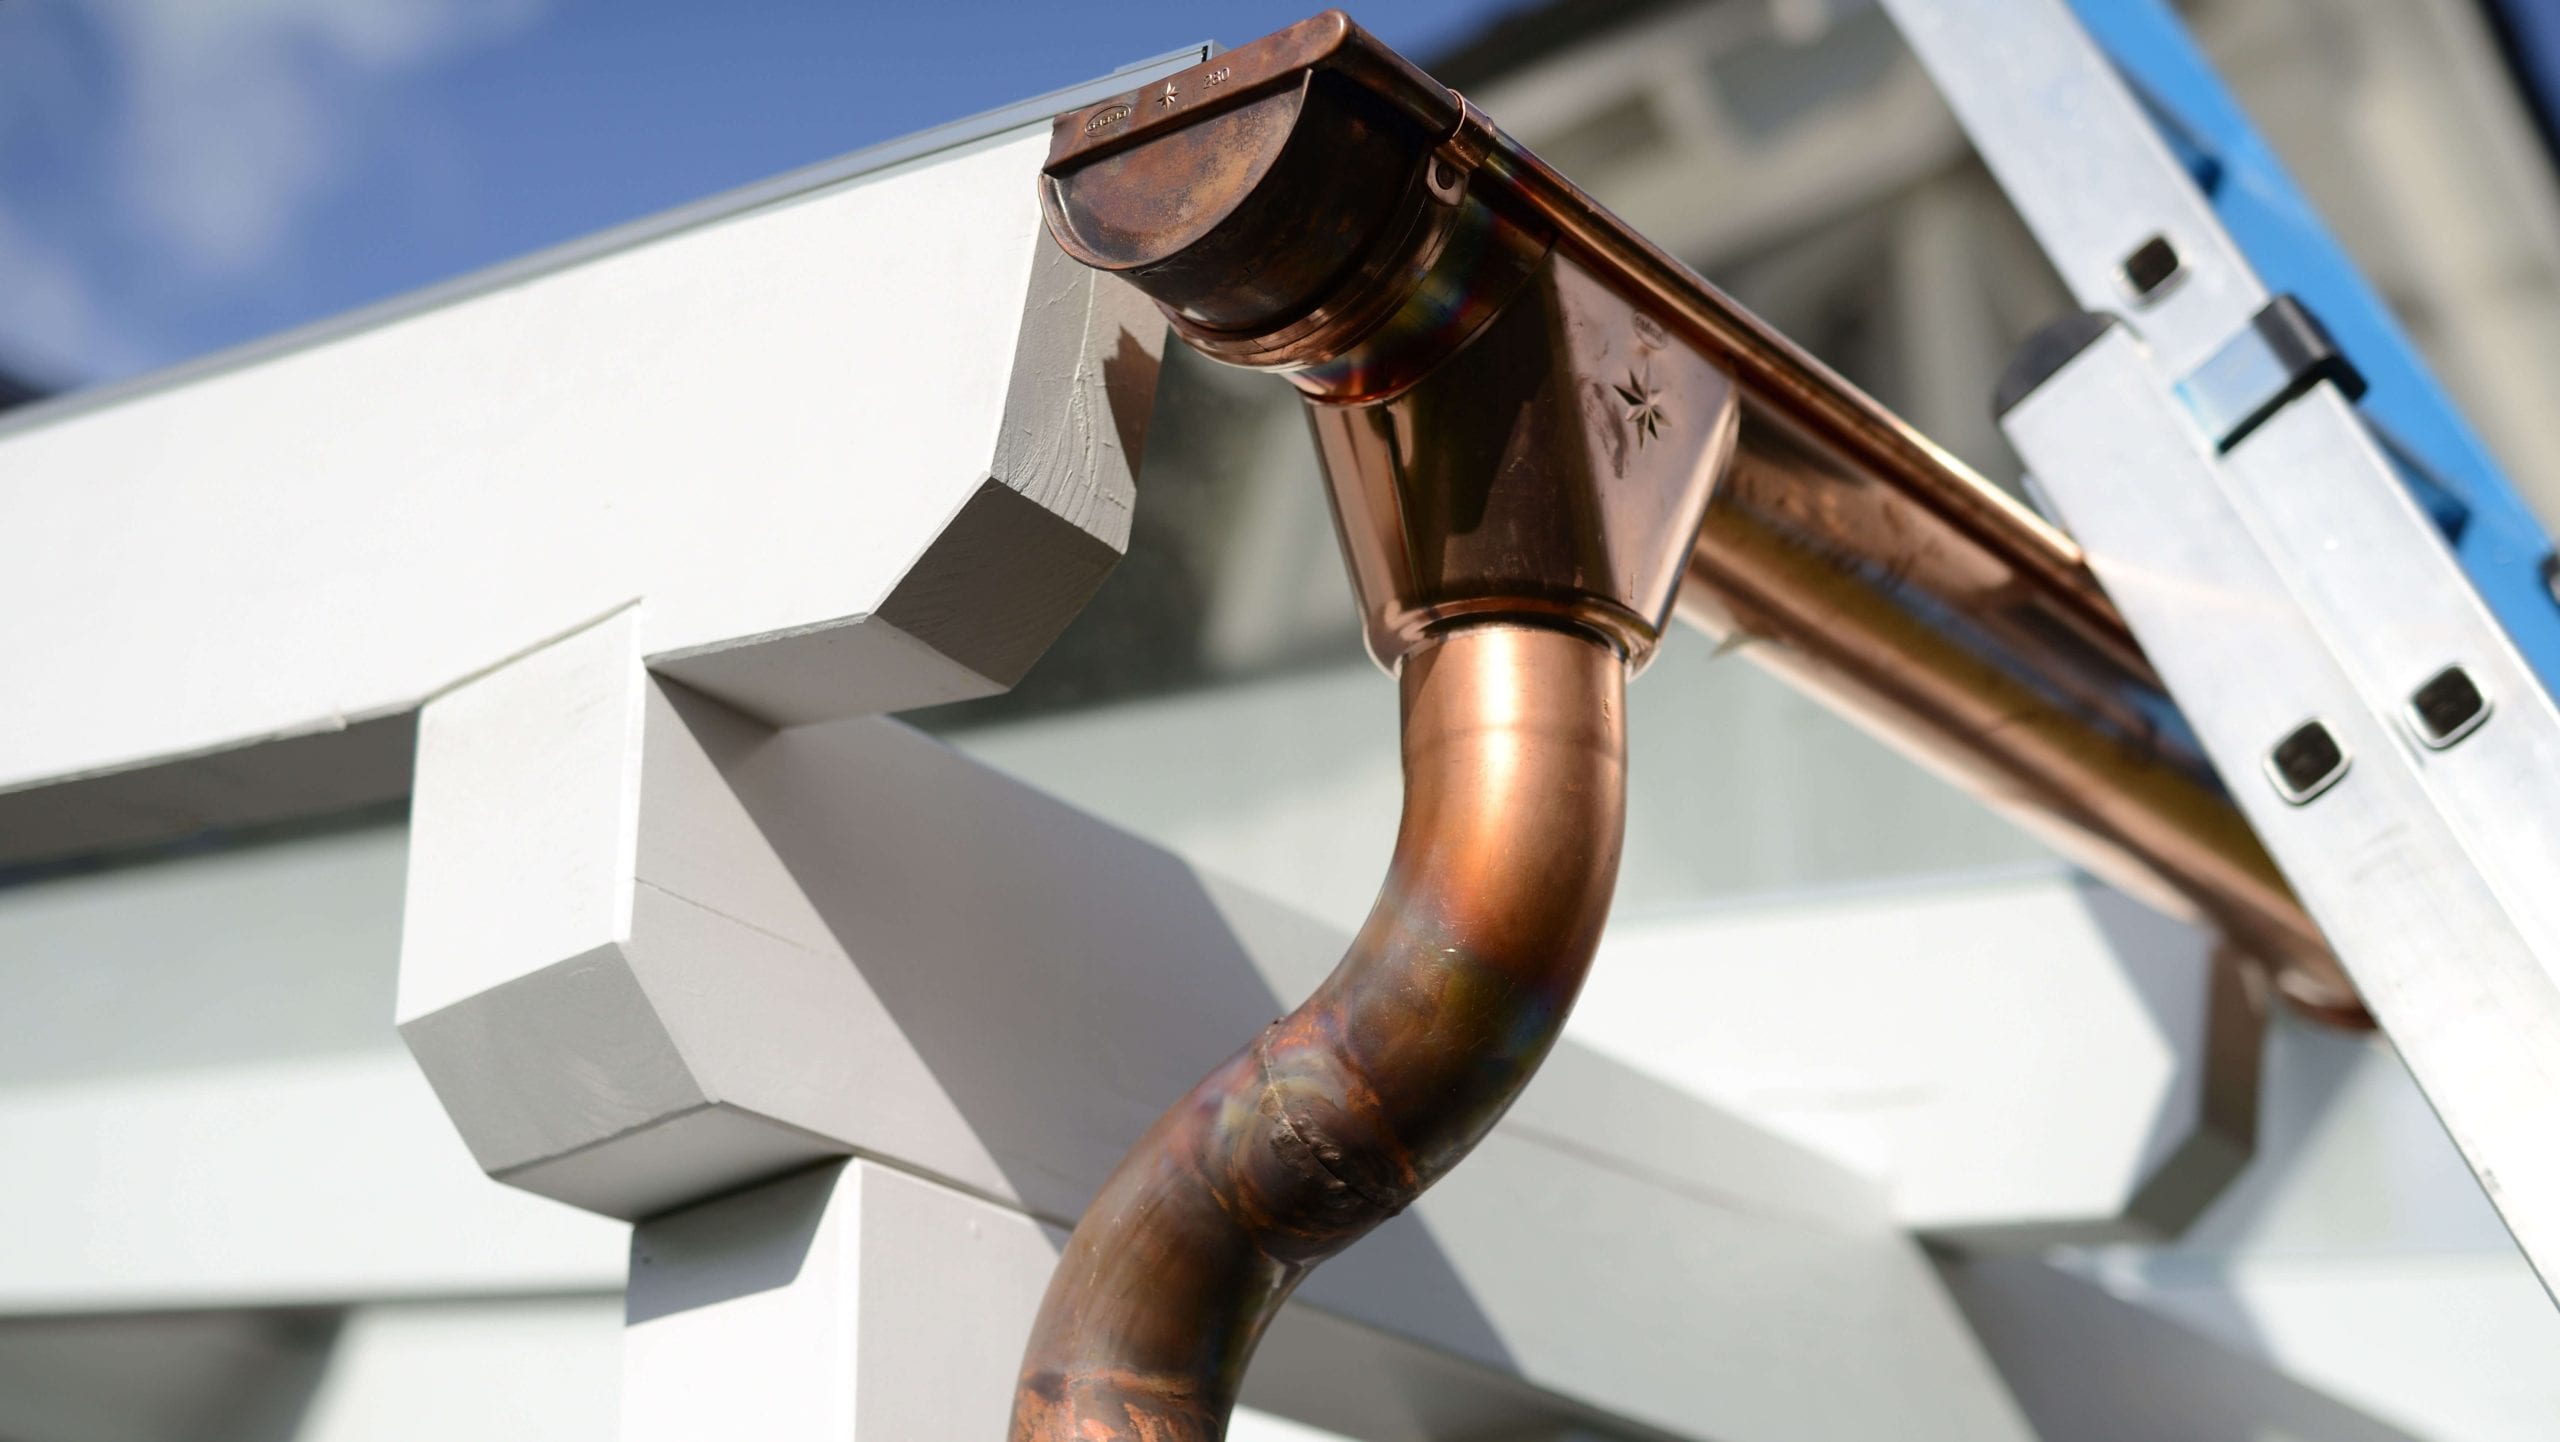 Make your property stand out with copper gutters. Contact for gutter installation in Conroe